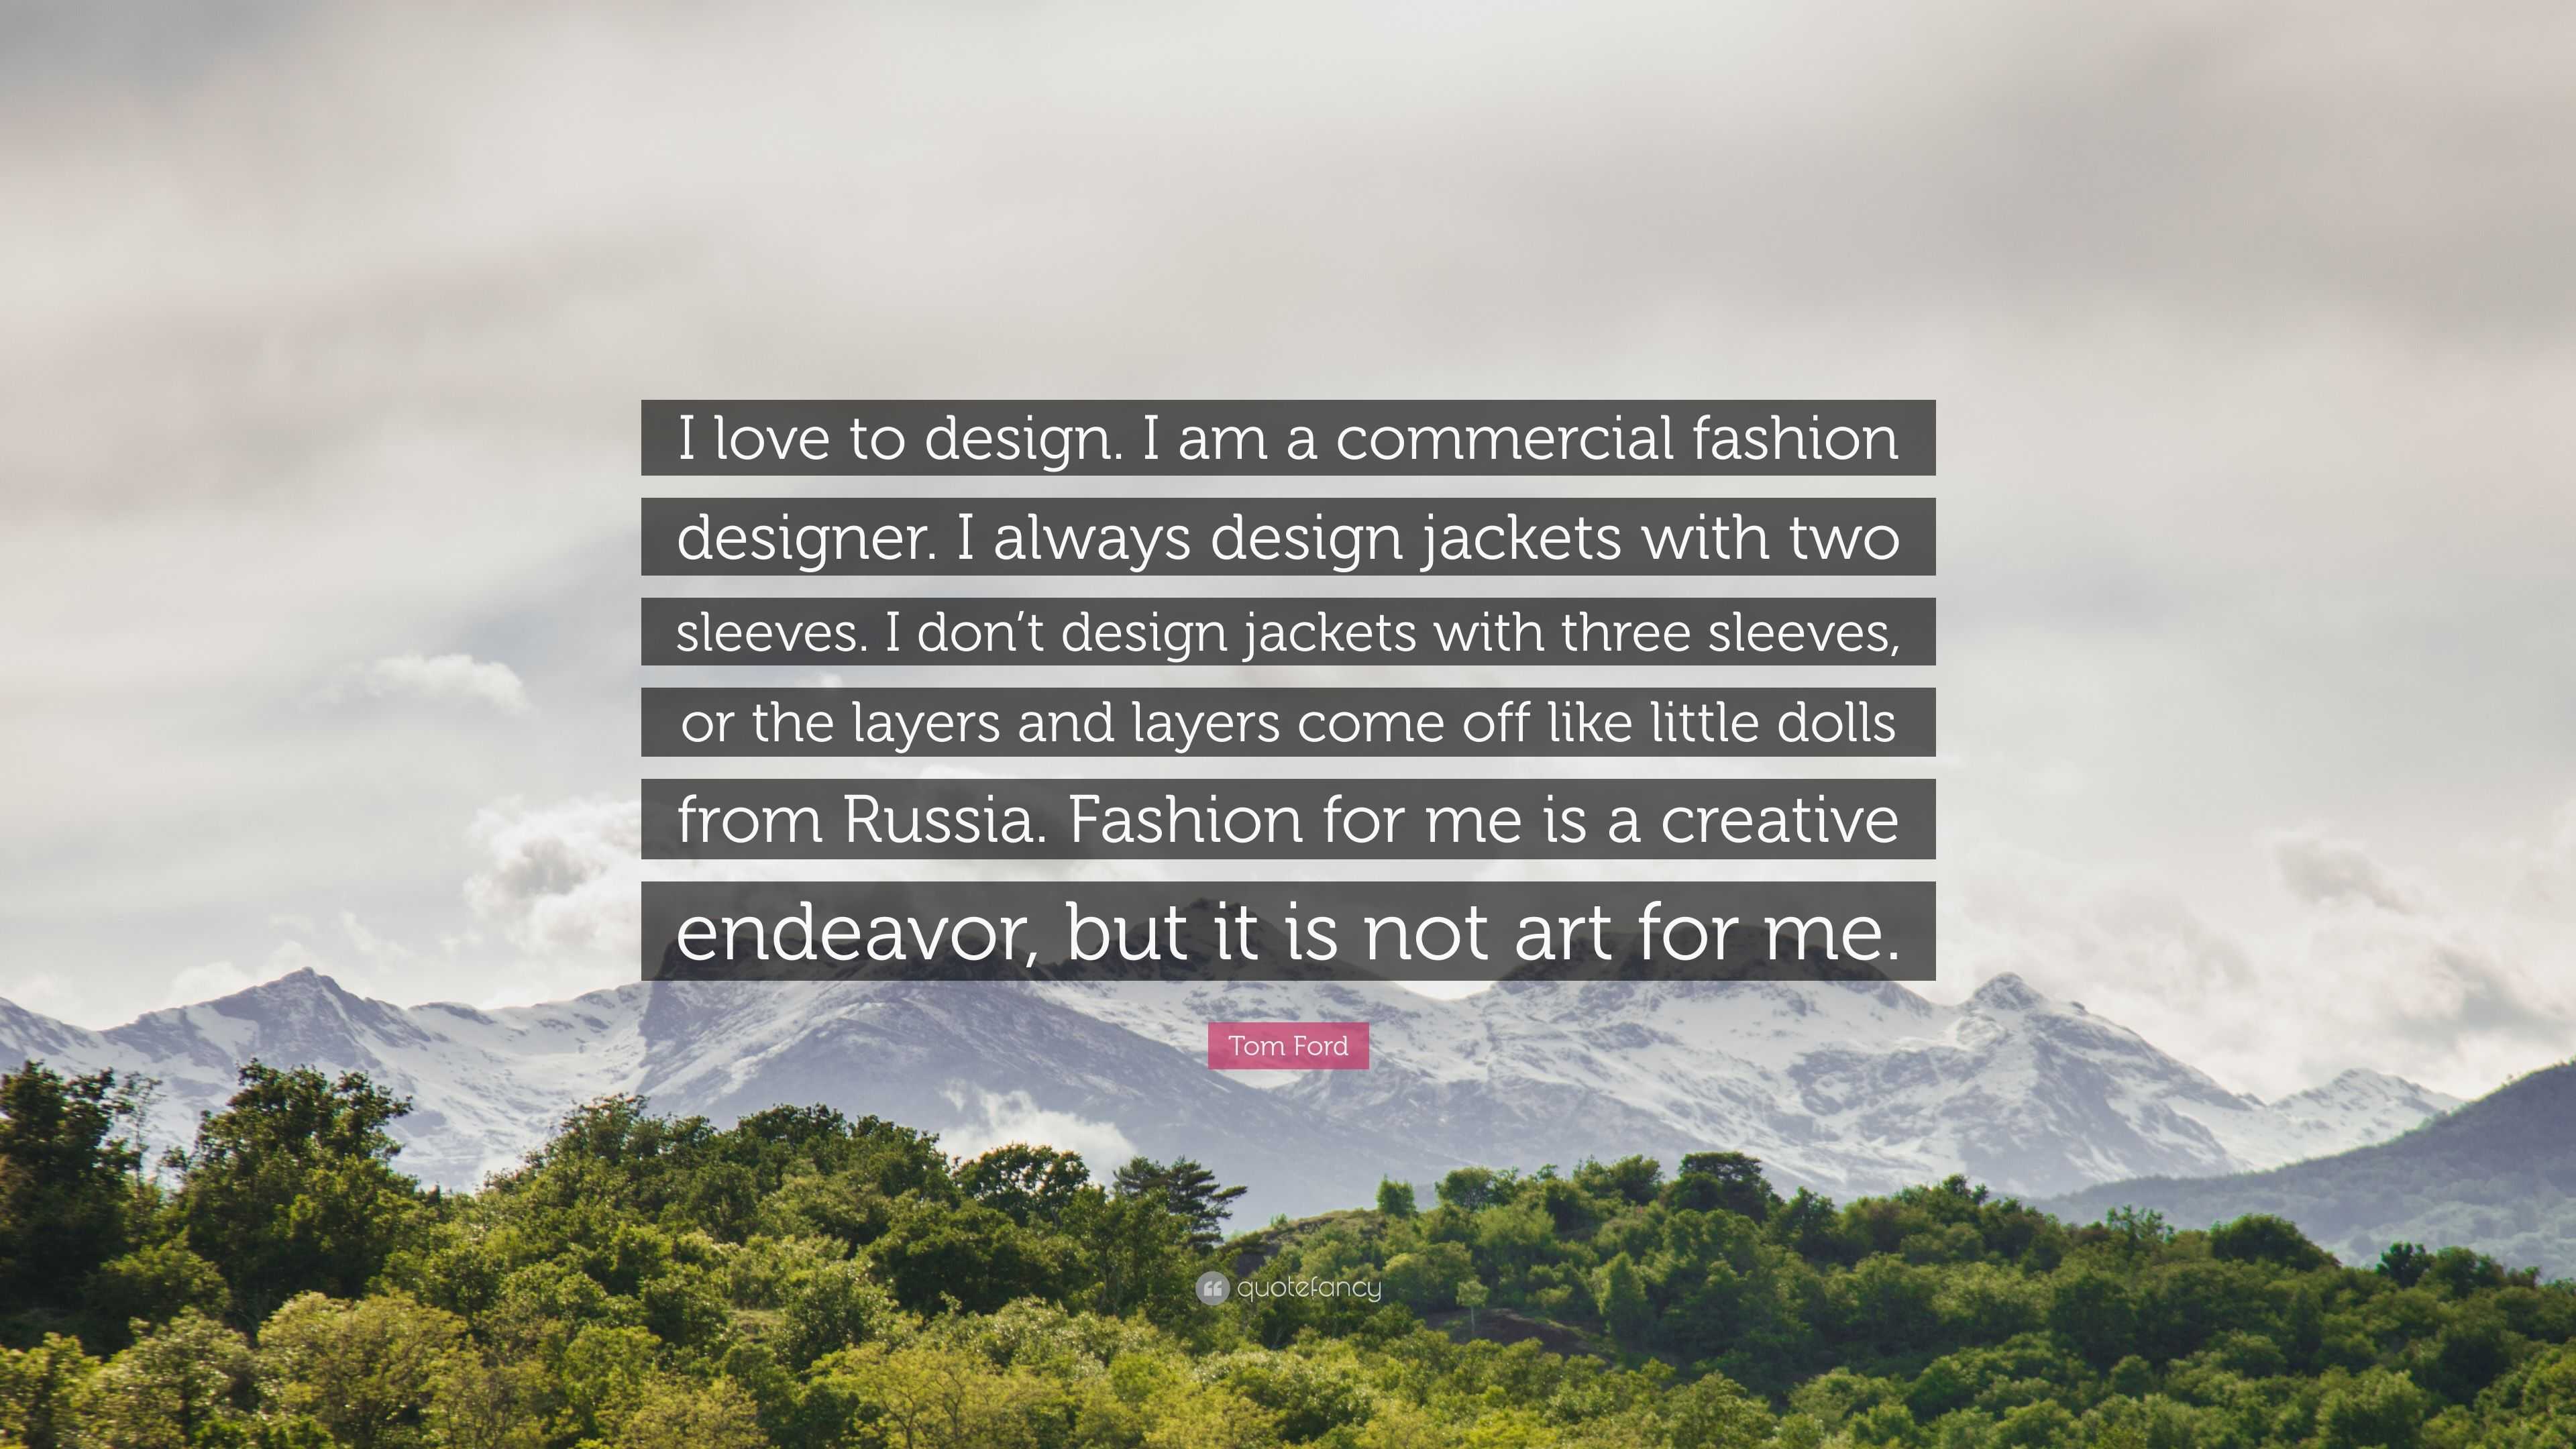 Tom Ford Quote: “I love to design. I am a commercial fashion designer. I  always design jackets with two sleeves. I don't design jackets w...”